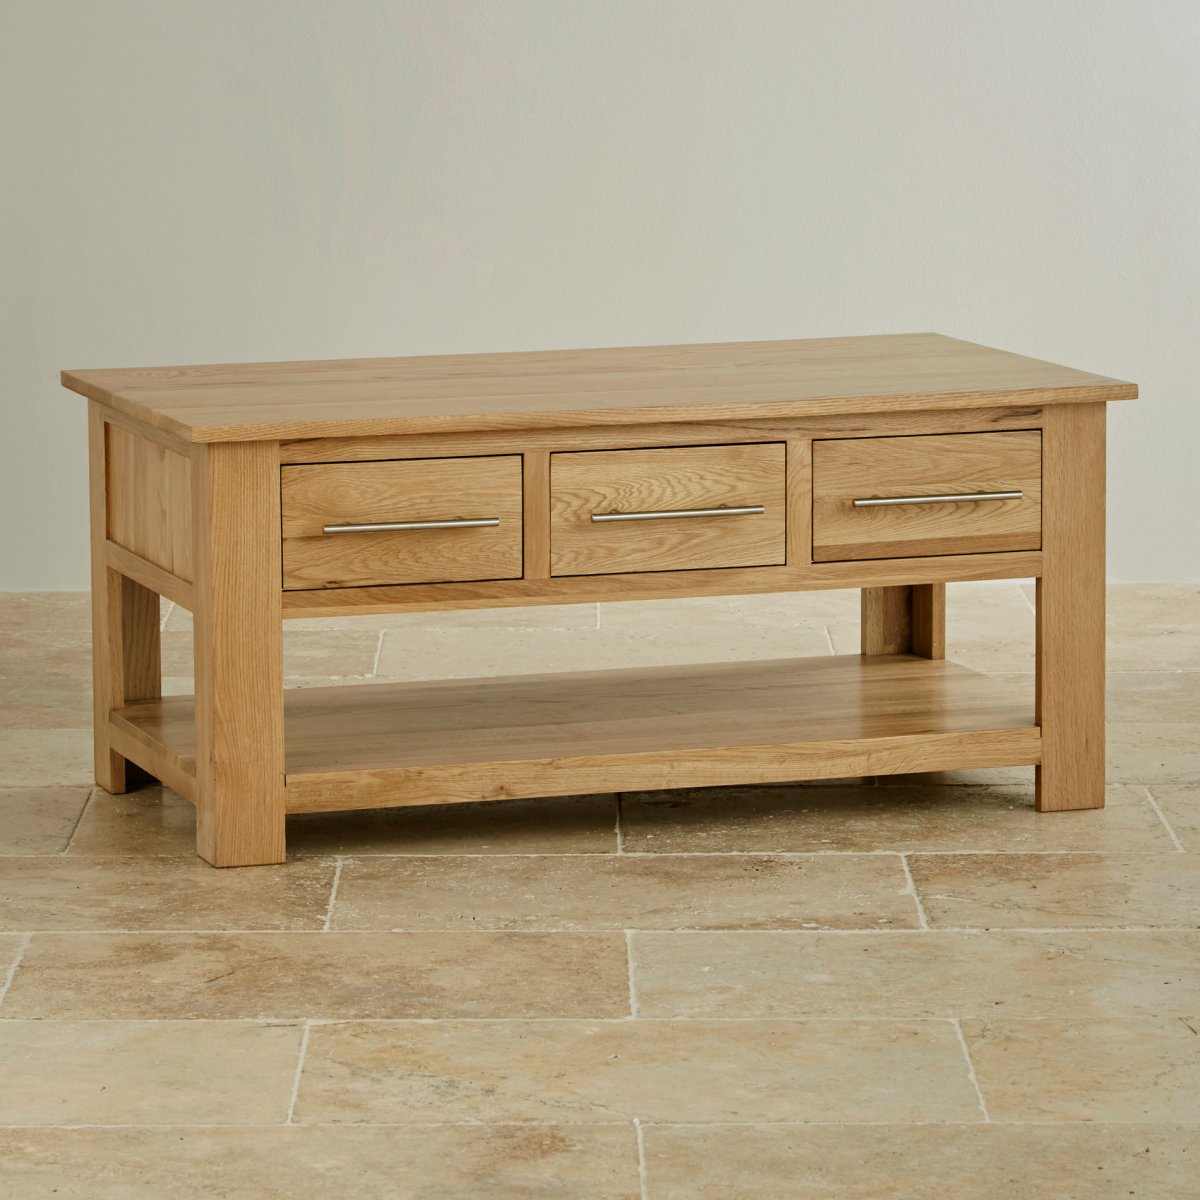 Oak Coffee Tables With Drawers / Norwich Oak Coffee Table 2 Drawers ...